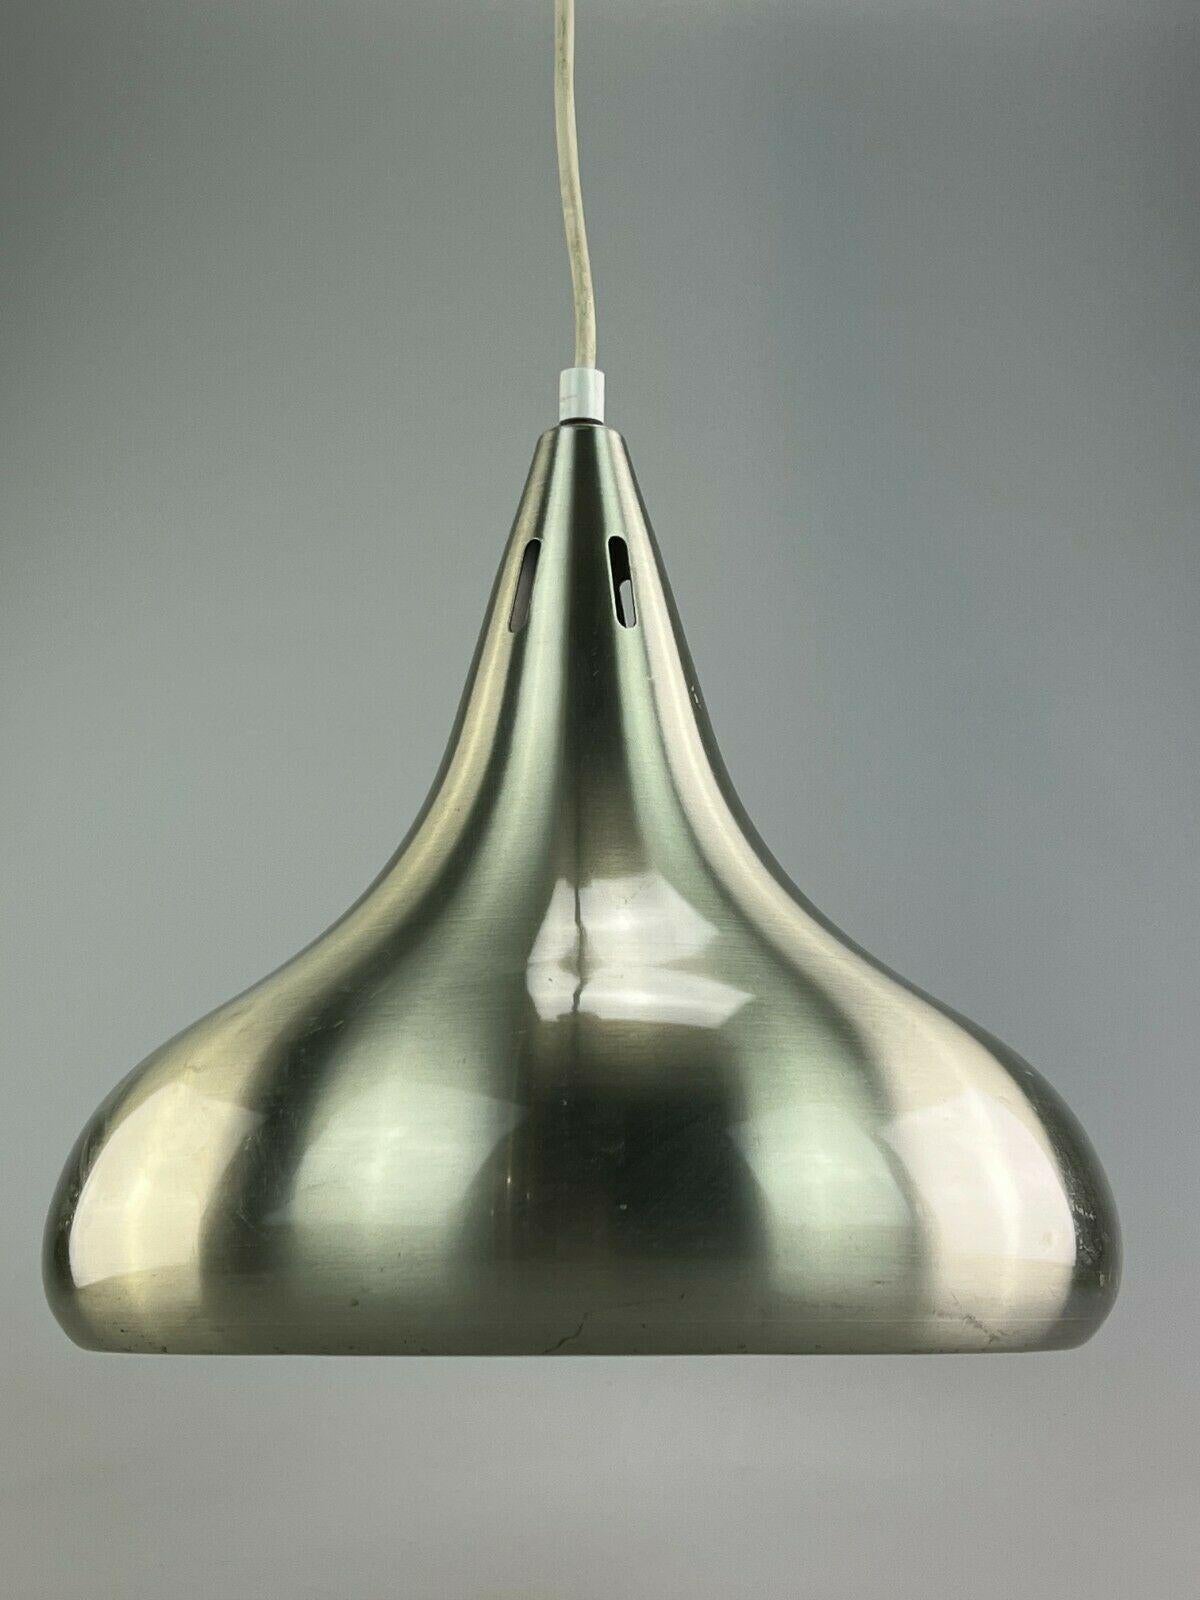 60s 70s Lamp Light Ceiling Lamp Aluminum Space Age Design In Good Condition For Sale In Neuenkirchen, NI